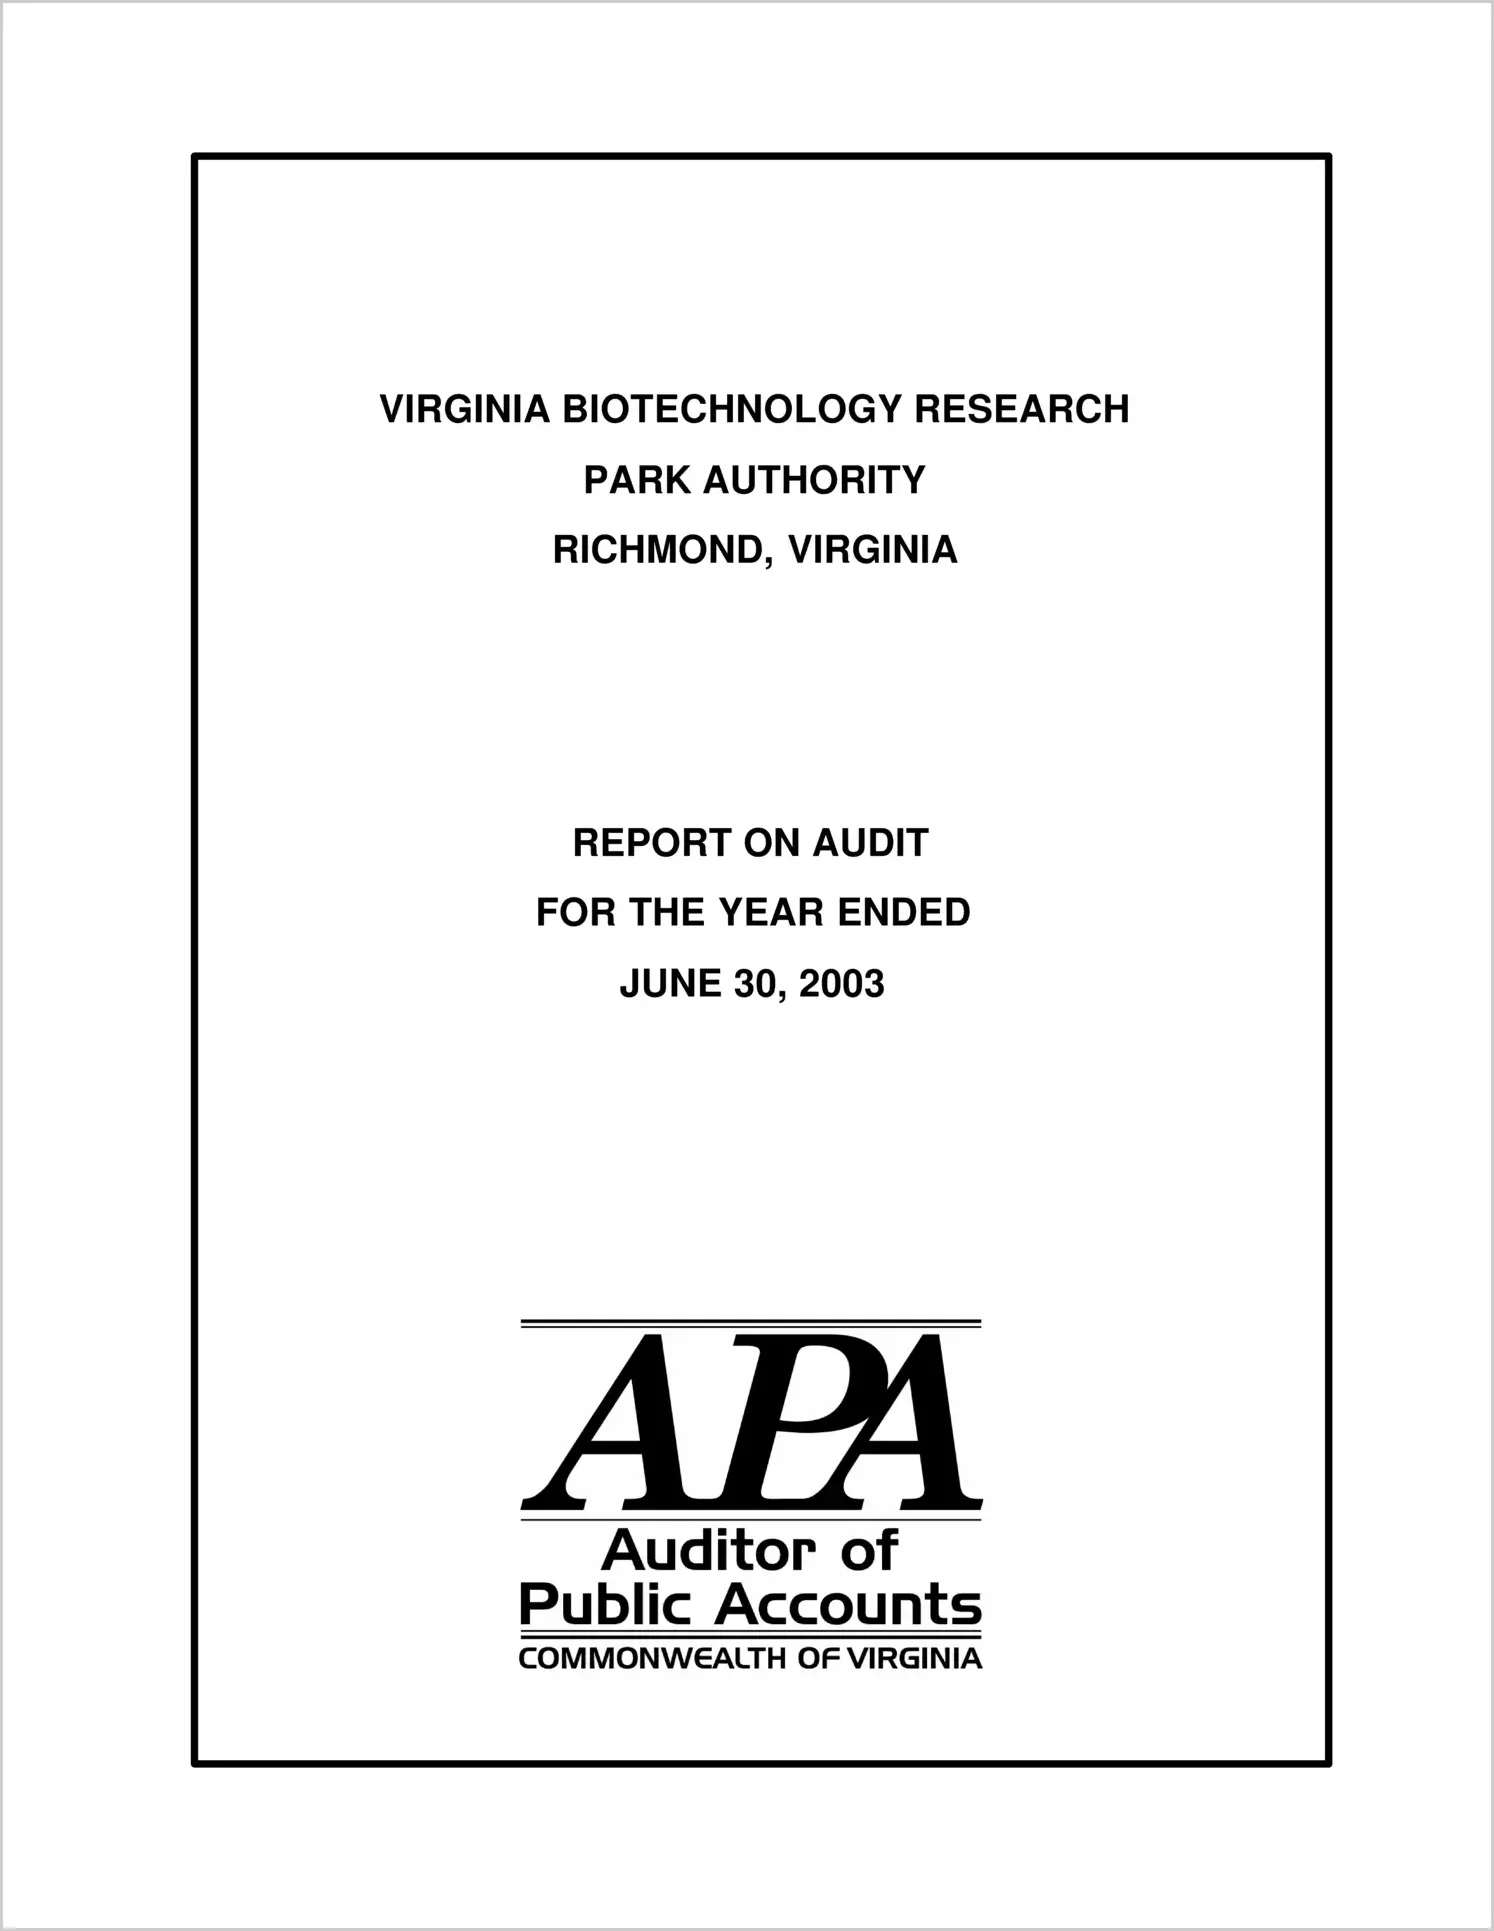 Virginia Biotechnology Research Park Authority for the year ended June 30, 2003